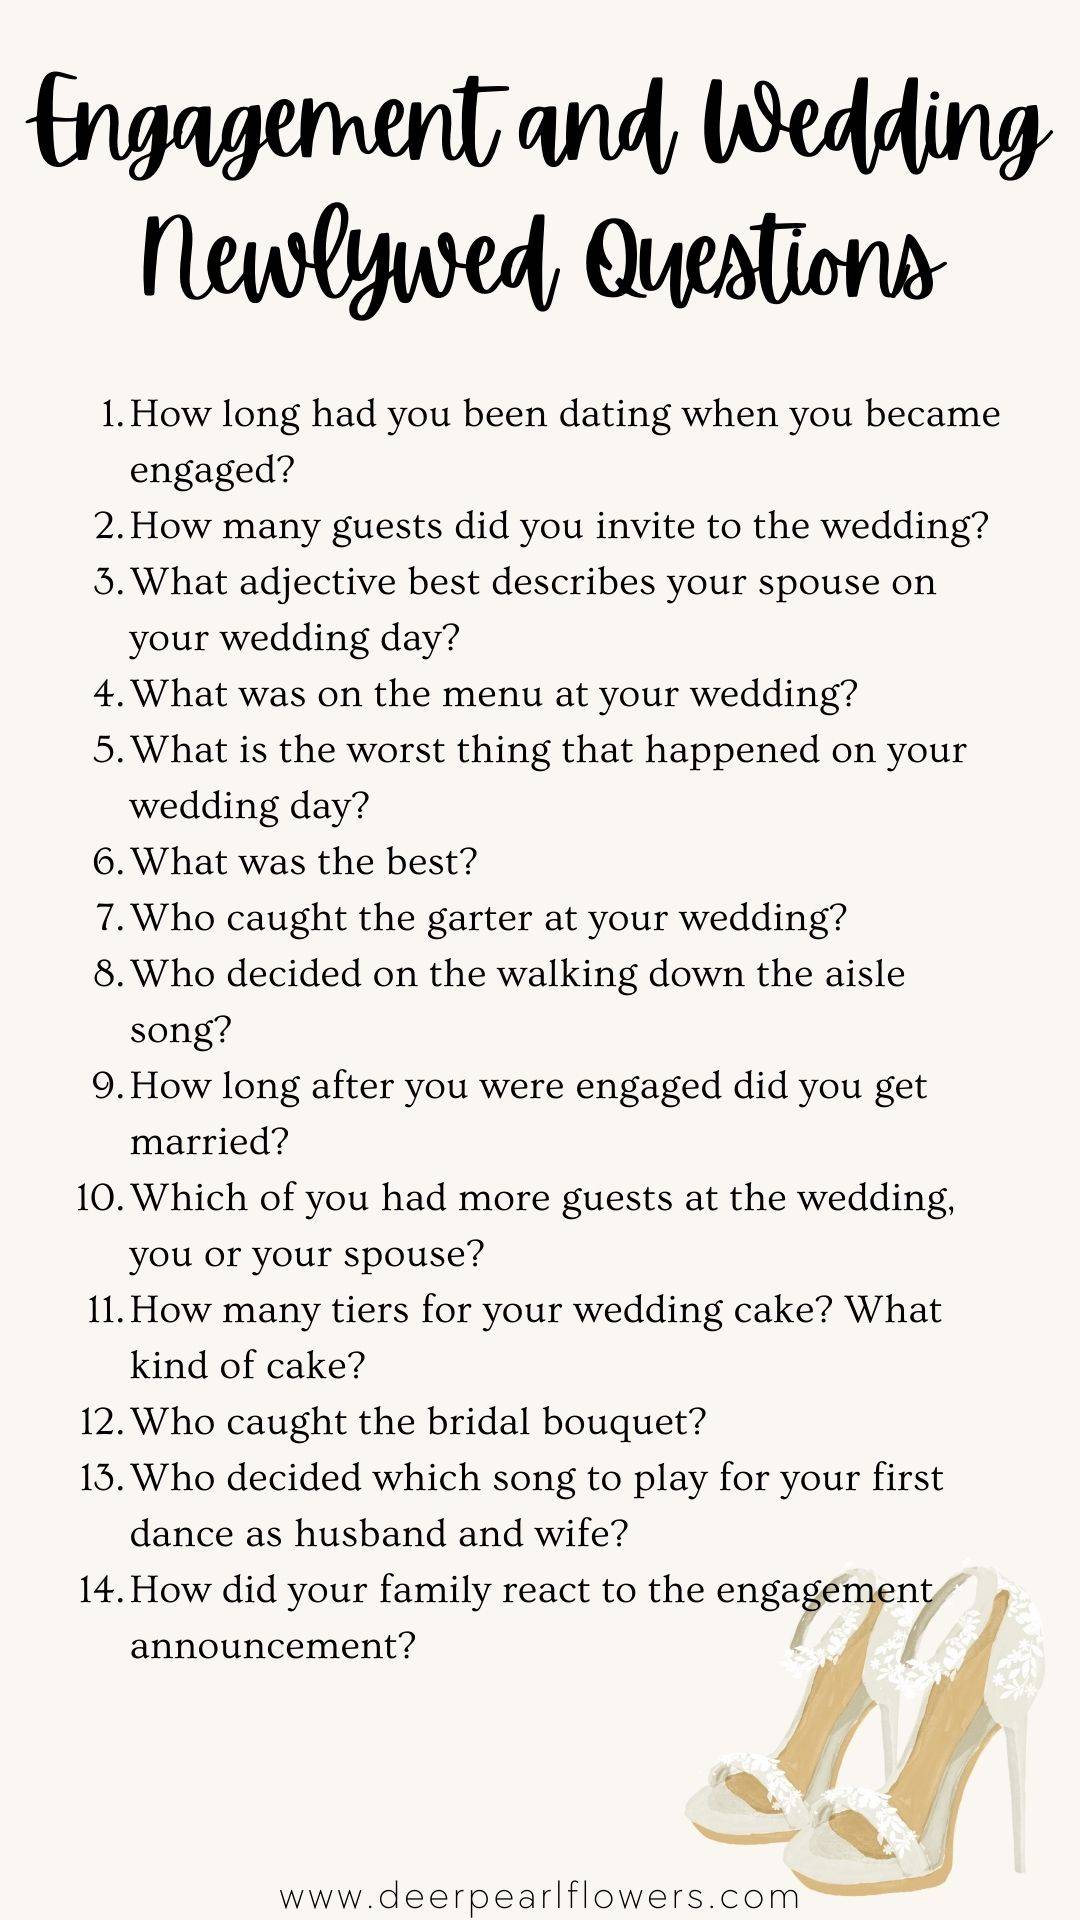 Engagement and Wedding Newlywed Questions